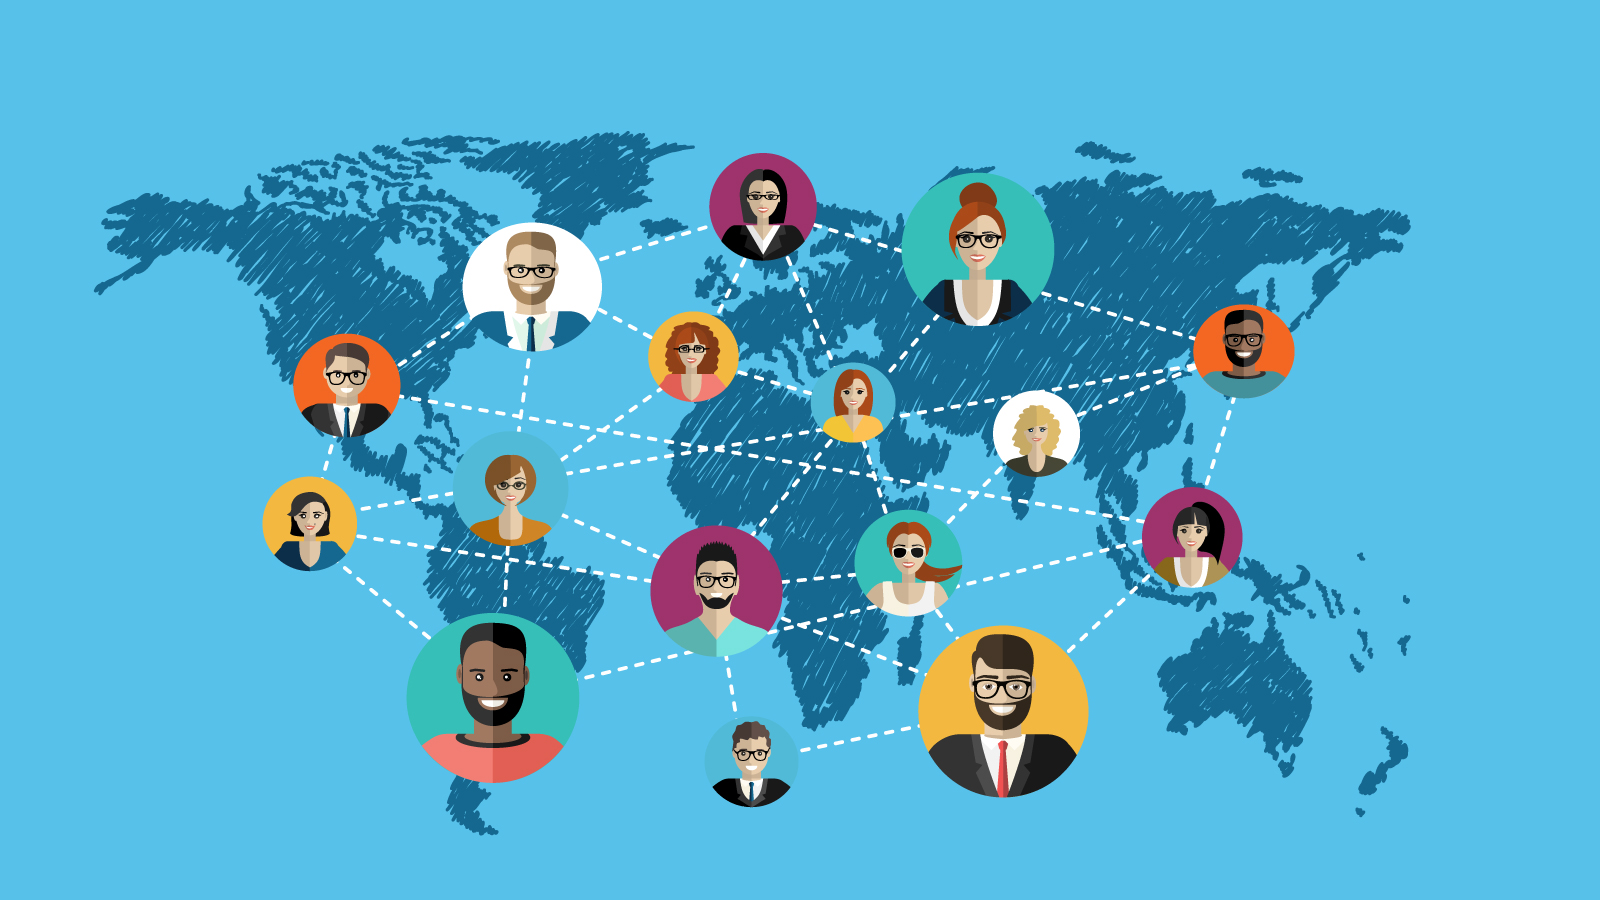 vector image of the world networking